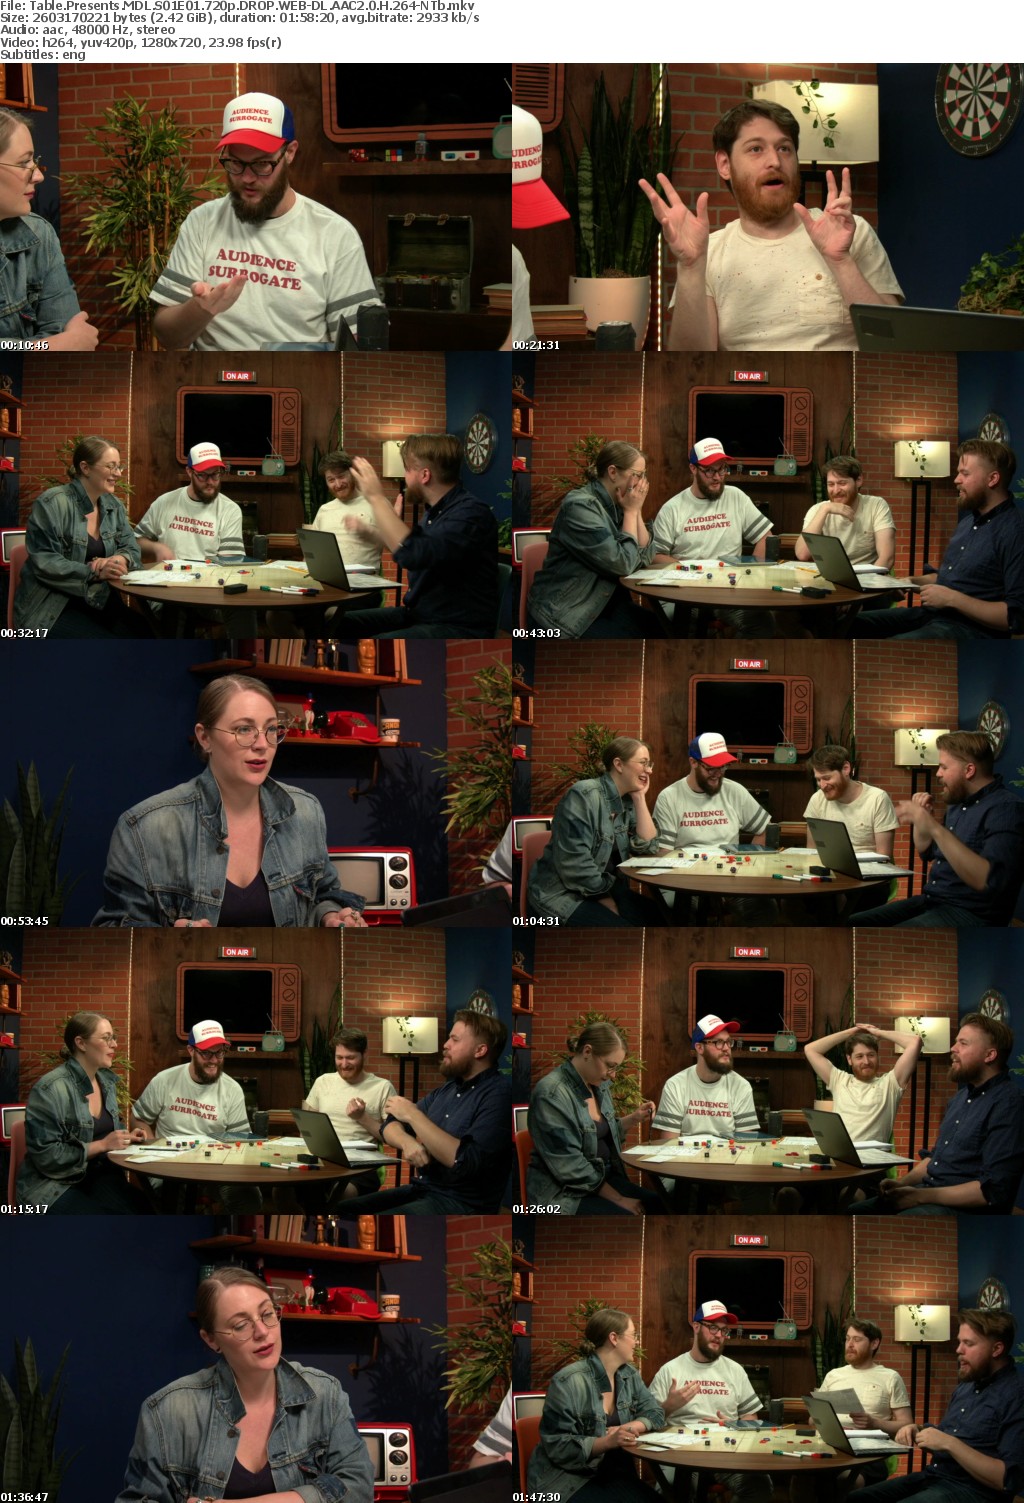 Table Presents MDL S01E01 720p DROP WEB-DL AAC2 0 H 264-NTb